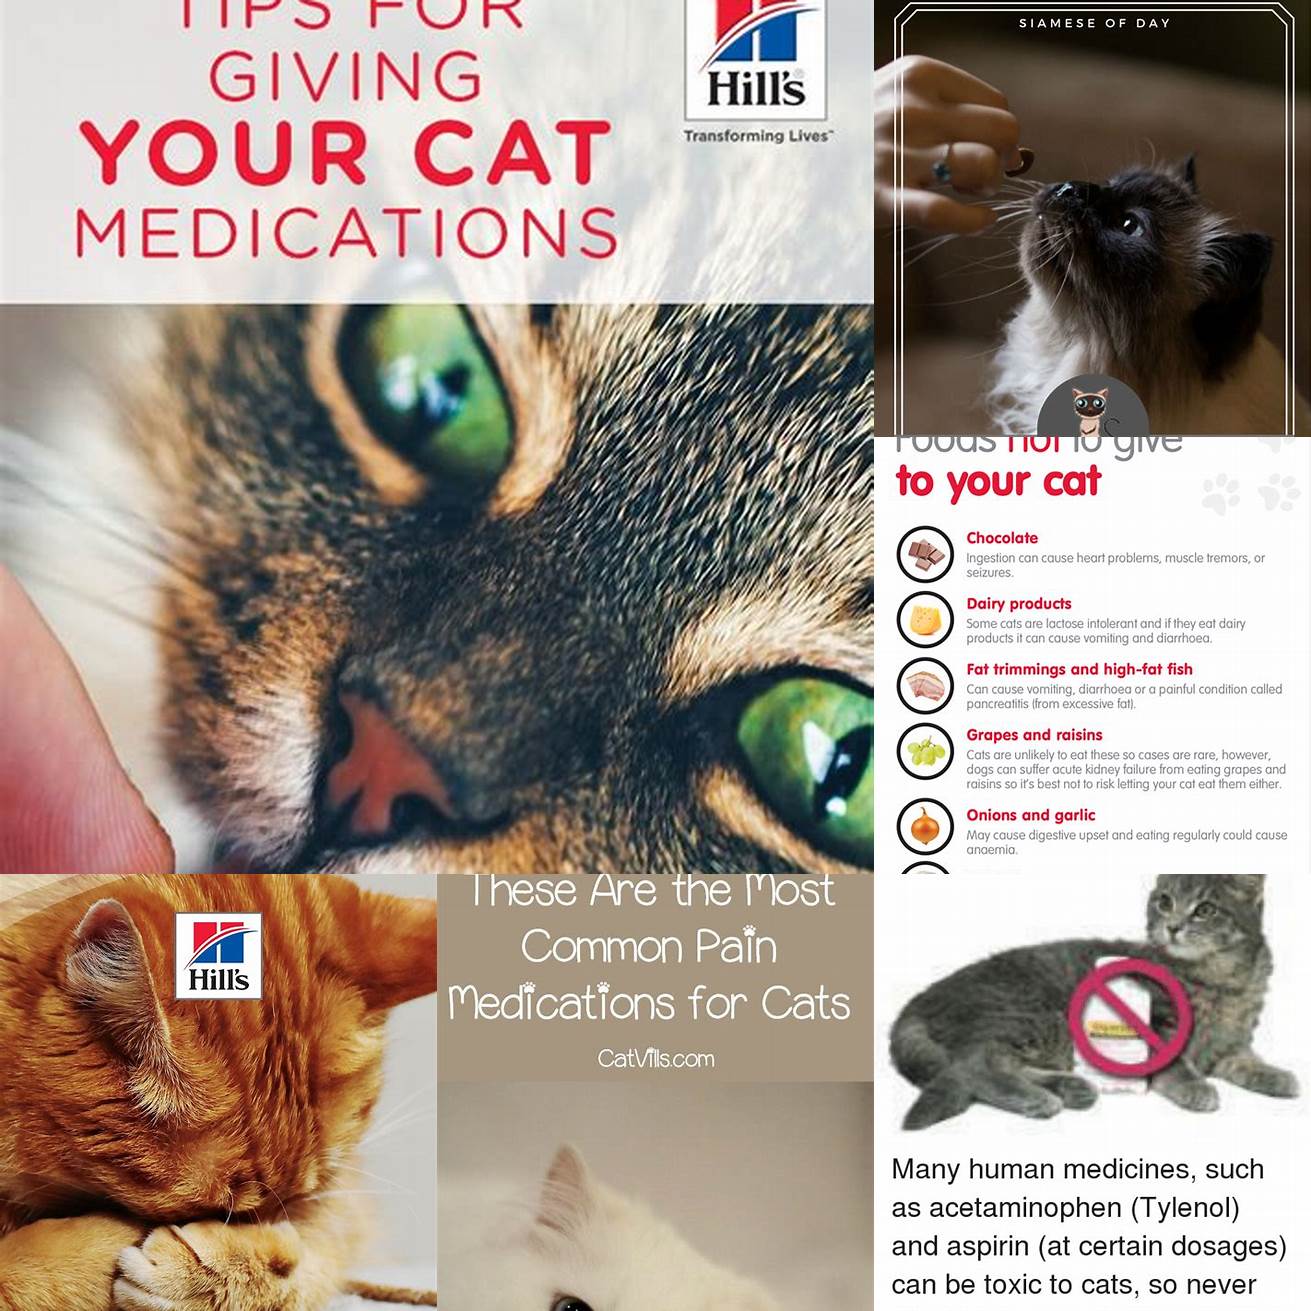 Do not give your cat any other medications without consulting your veterinarian first Some medications can interact with amoxicillin and cause adverse effects